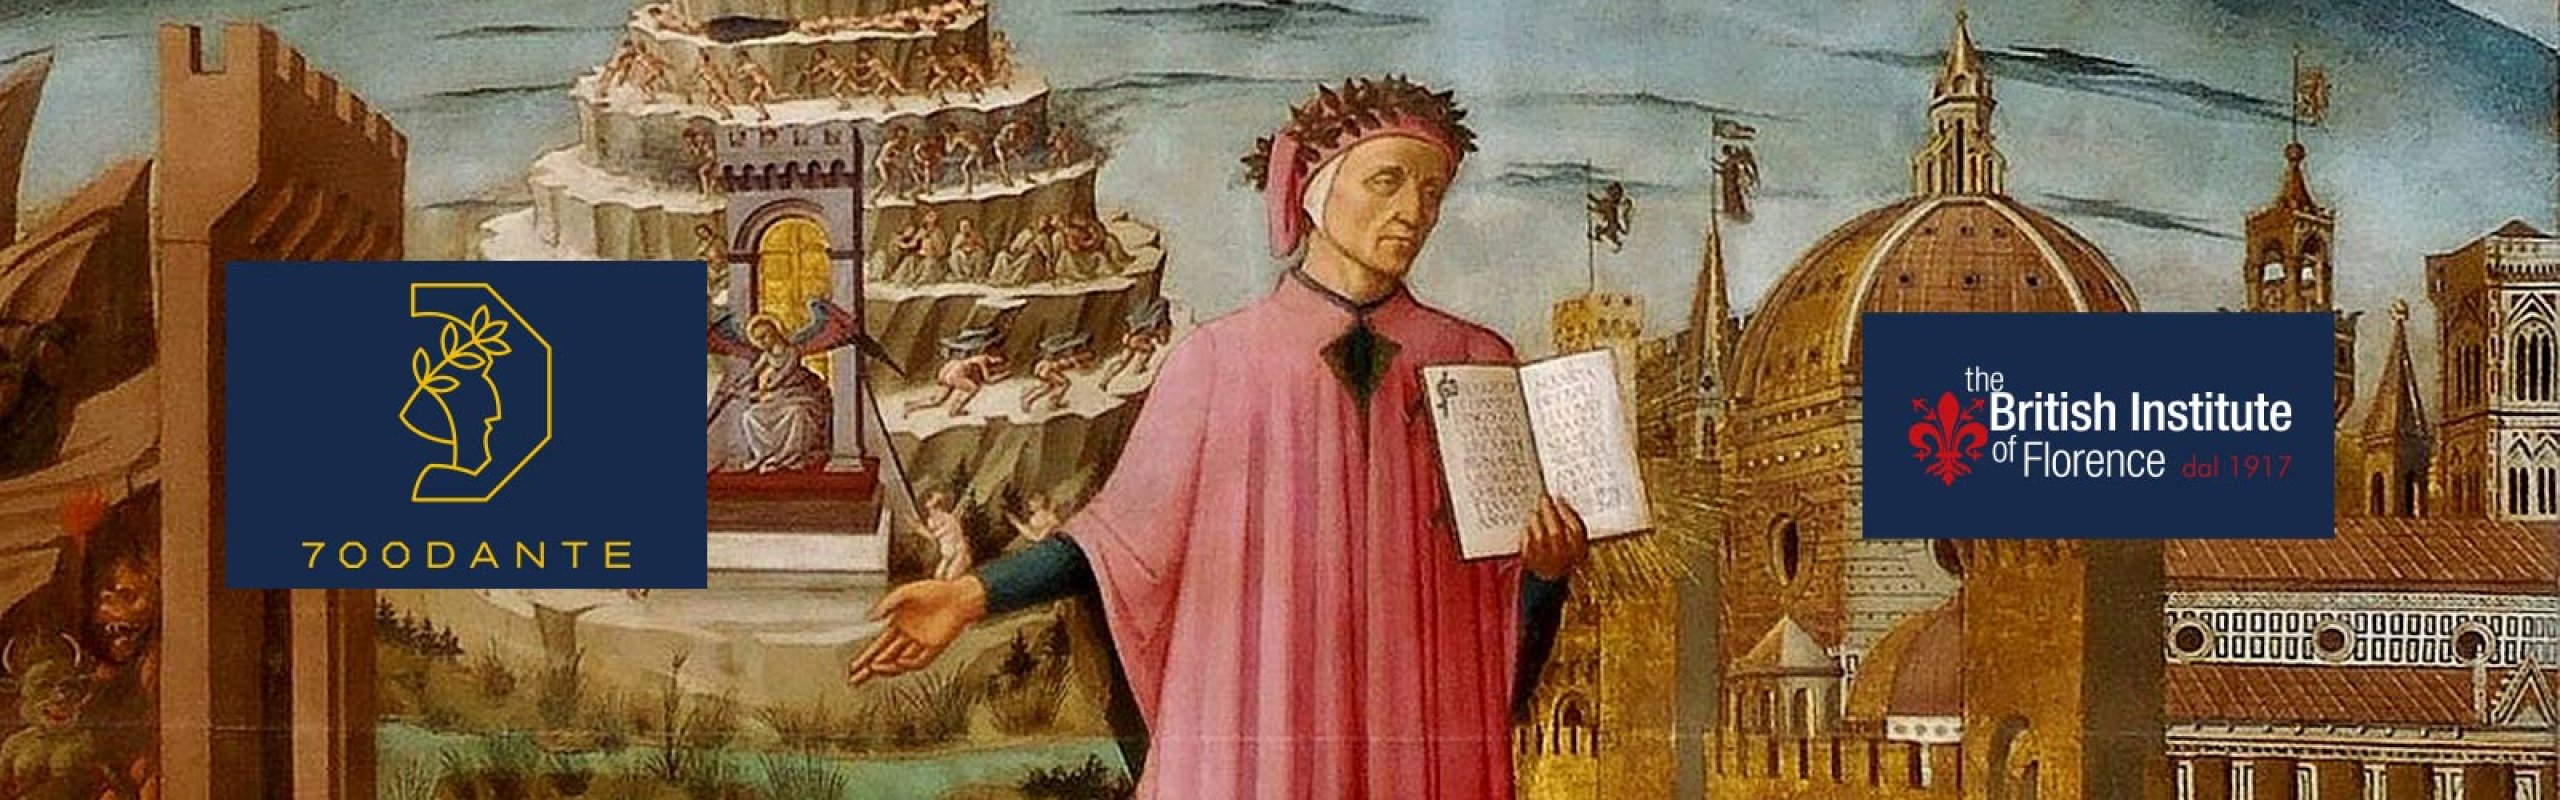 Godi, Fiorenza!  Dante’s Poetic (and other) Feelings about Florence 